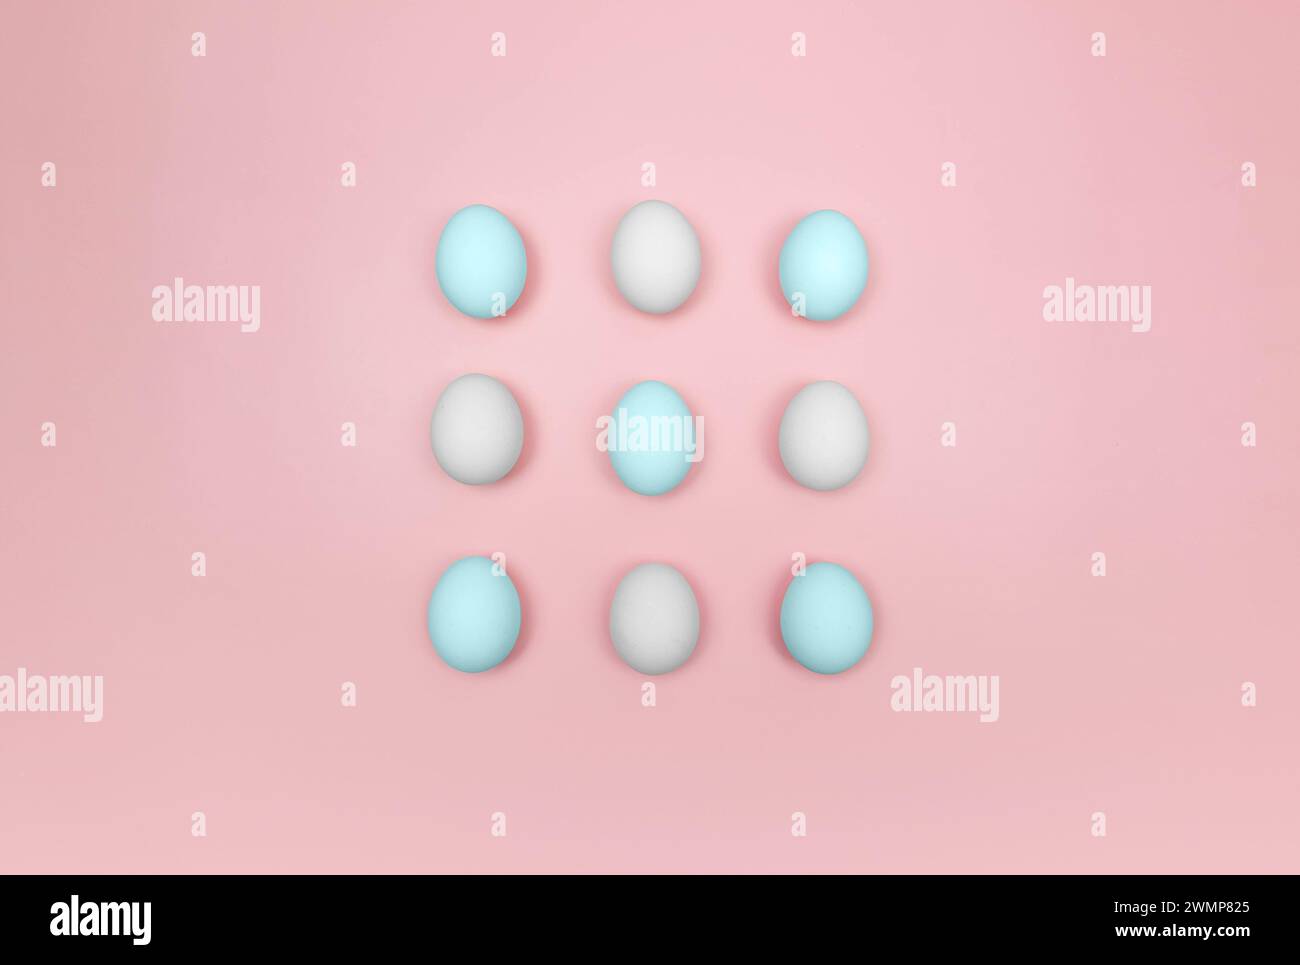 Top view of white and blue eggs on pink background. Creative easter composition, flat lay, copy space. Spring, modern and minimalist. Stock Photo